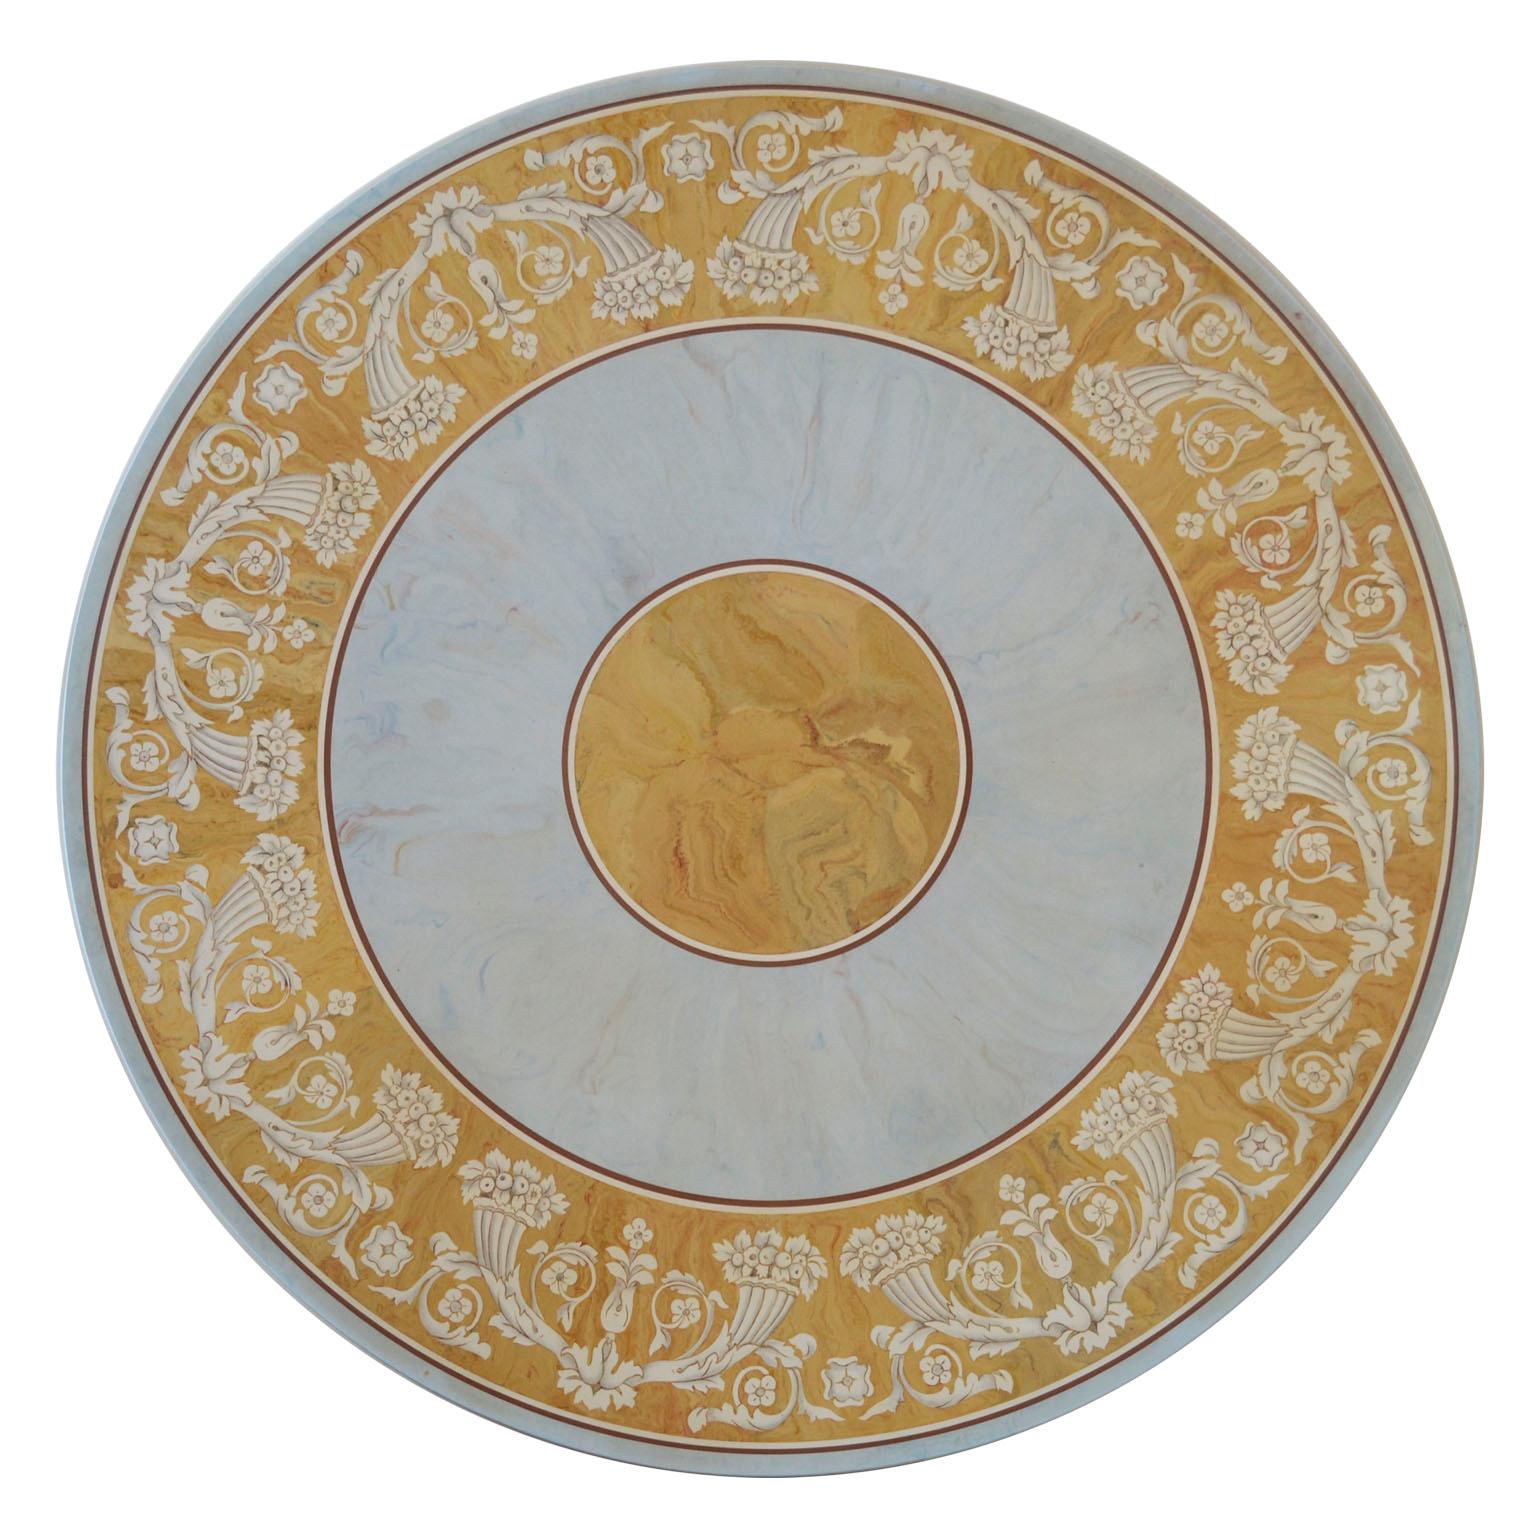 Verbena round dining or center table
This table with scagliola art inlay takes inspiration from the classical paliotto with a frame of cornucopias but the choice of colors, Siena yellow and light blue give a sophisticated effect to this romantic